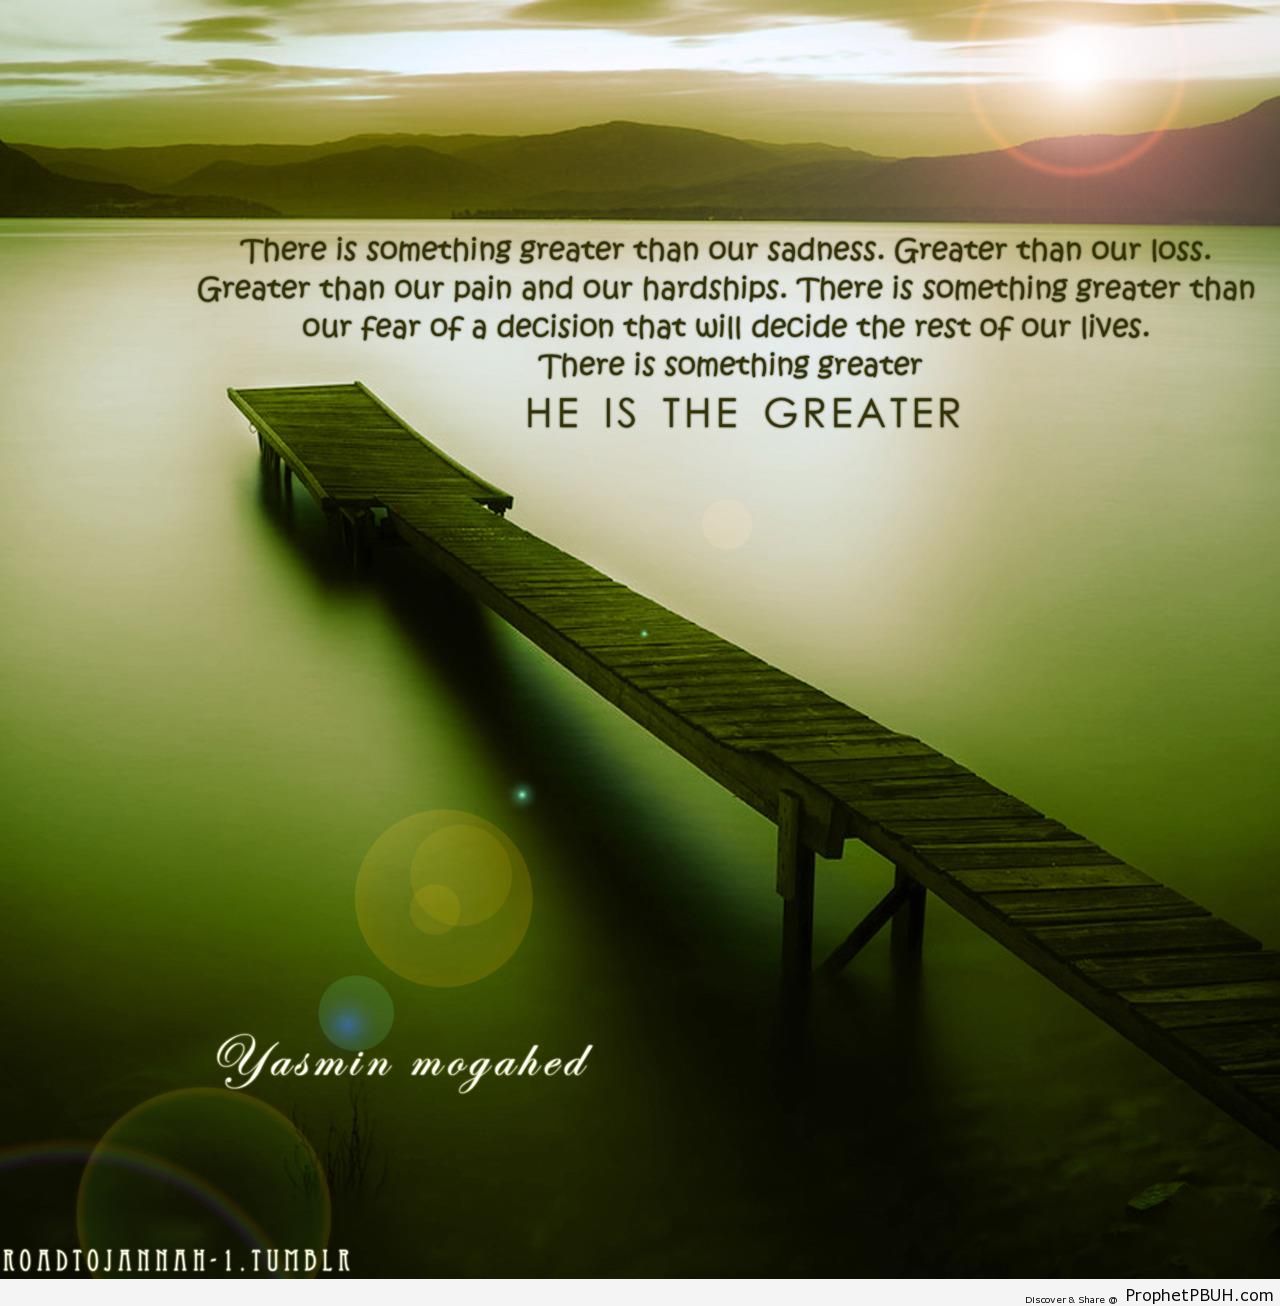 Allah is Greater - Islamic Quotes About Allah 